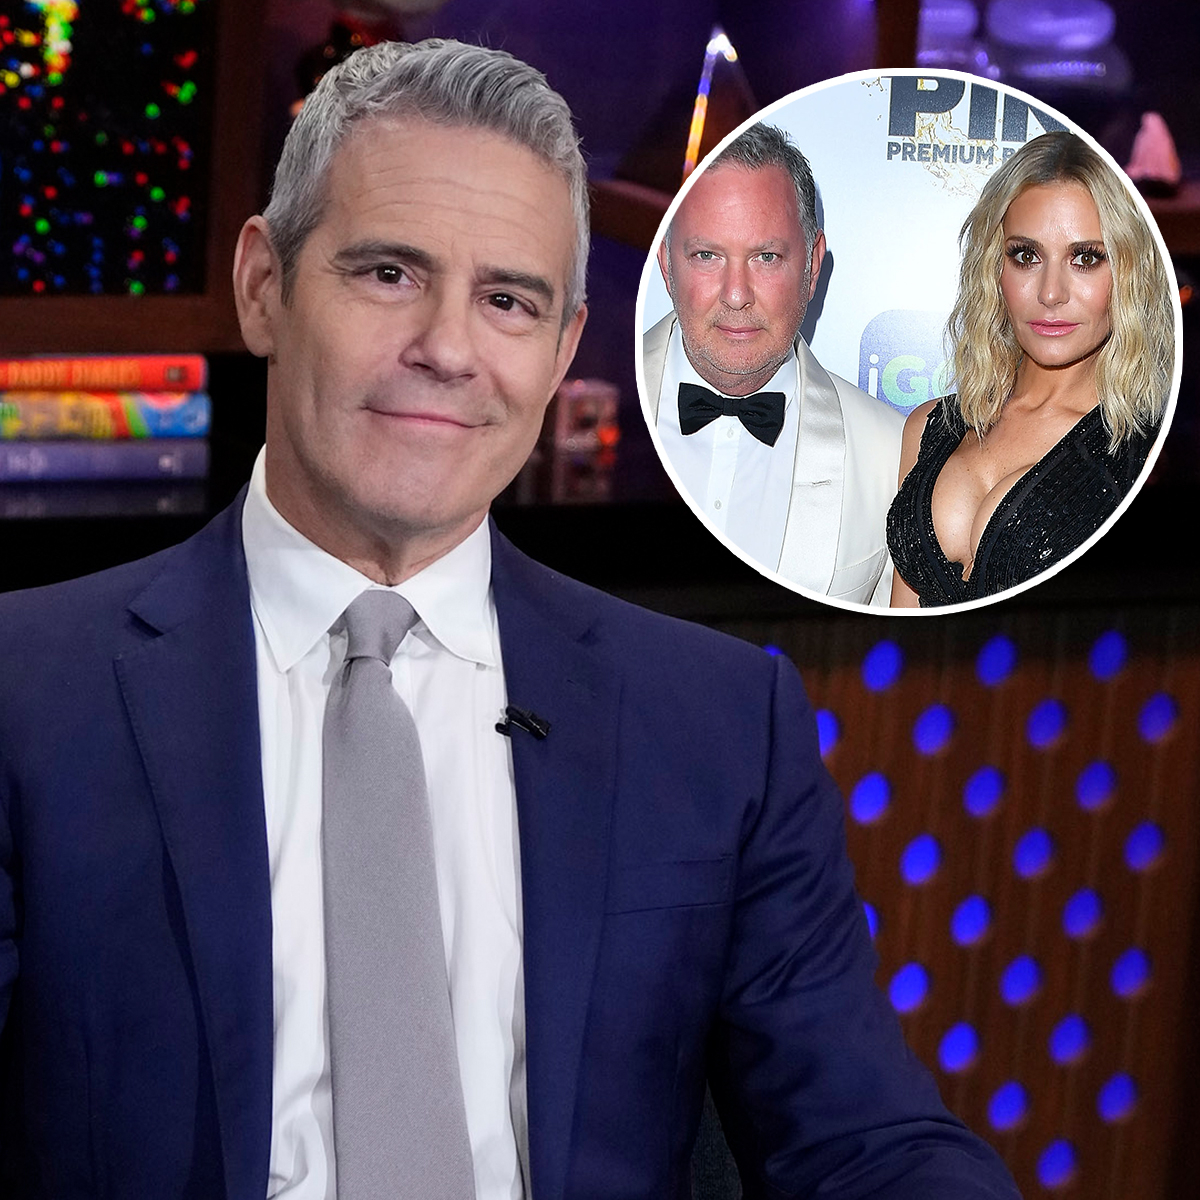 Andy Cohen Reacts to Rumors Dorit Kemsley’s Split Is a Publicity Stunt